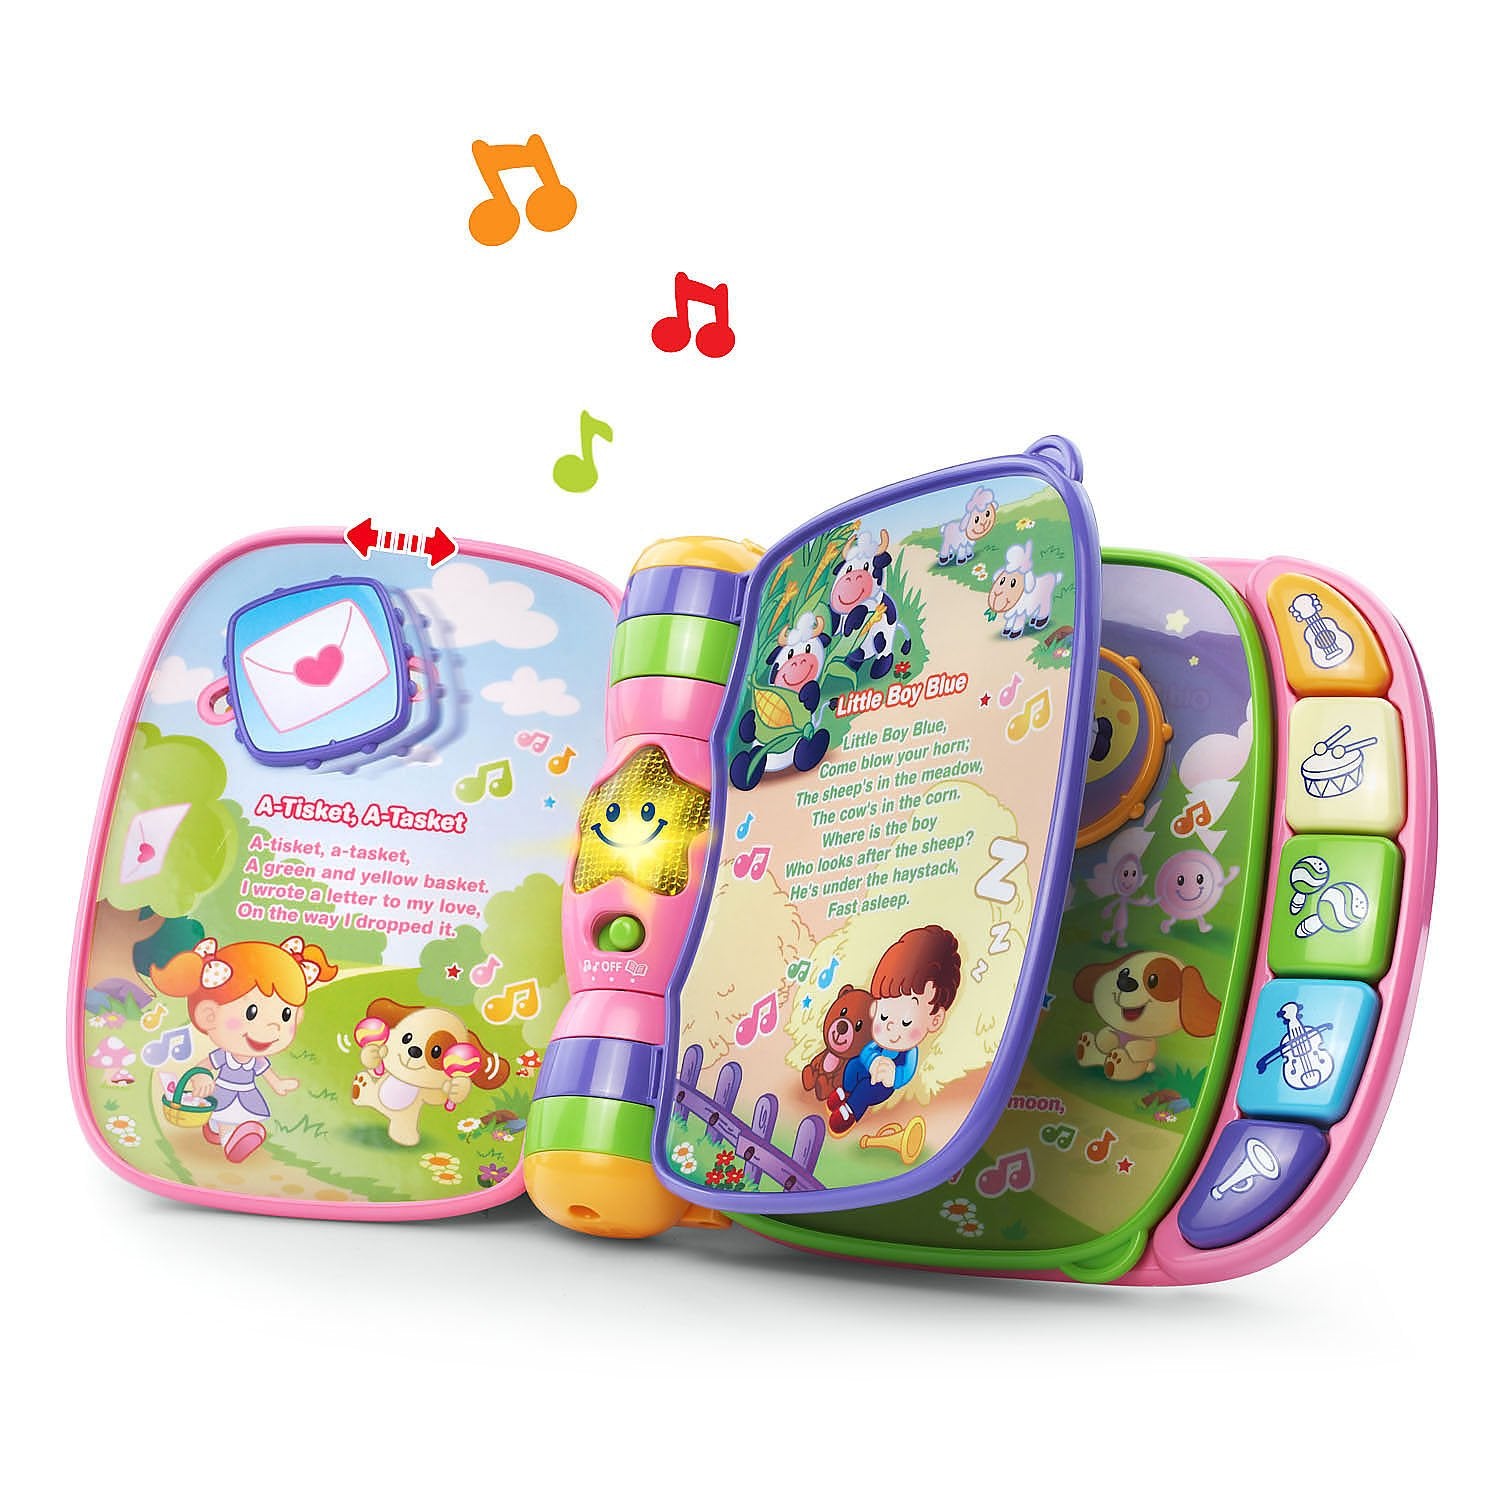 VTech Musical Rhymes Book, Red